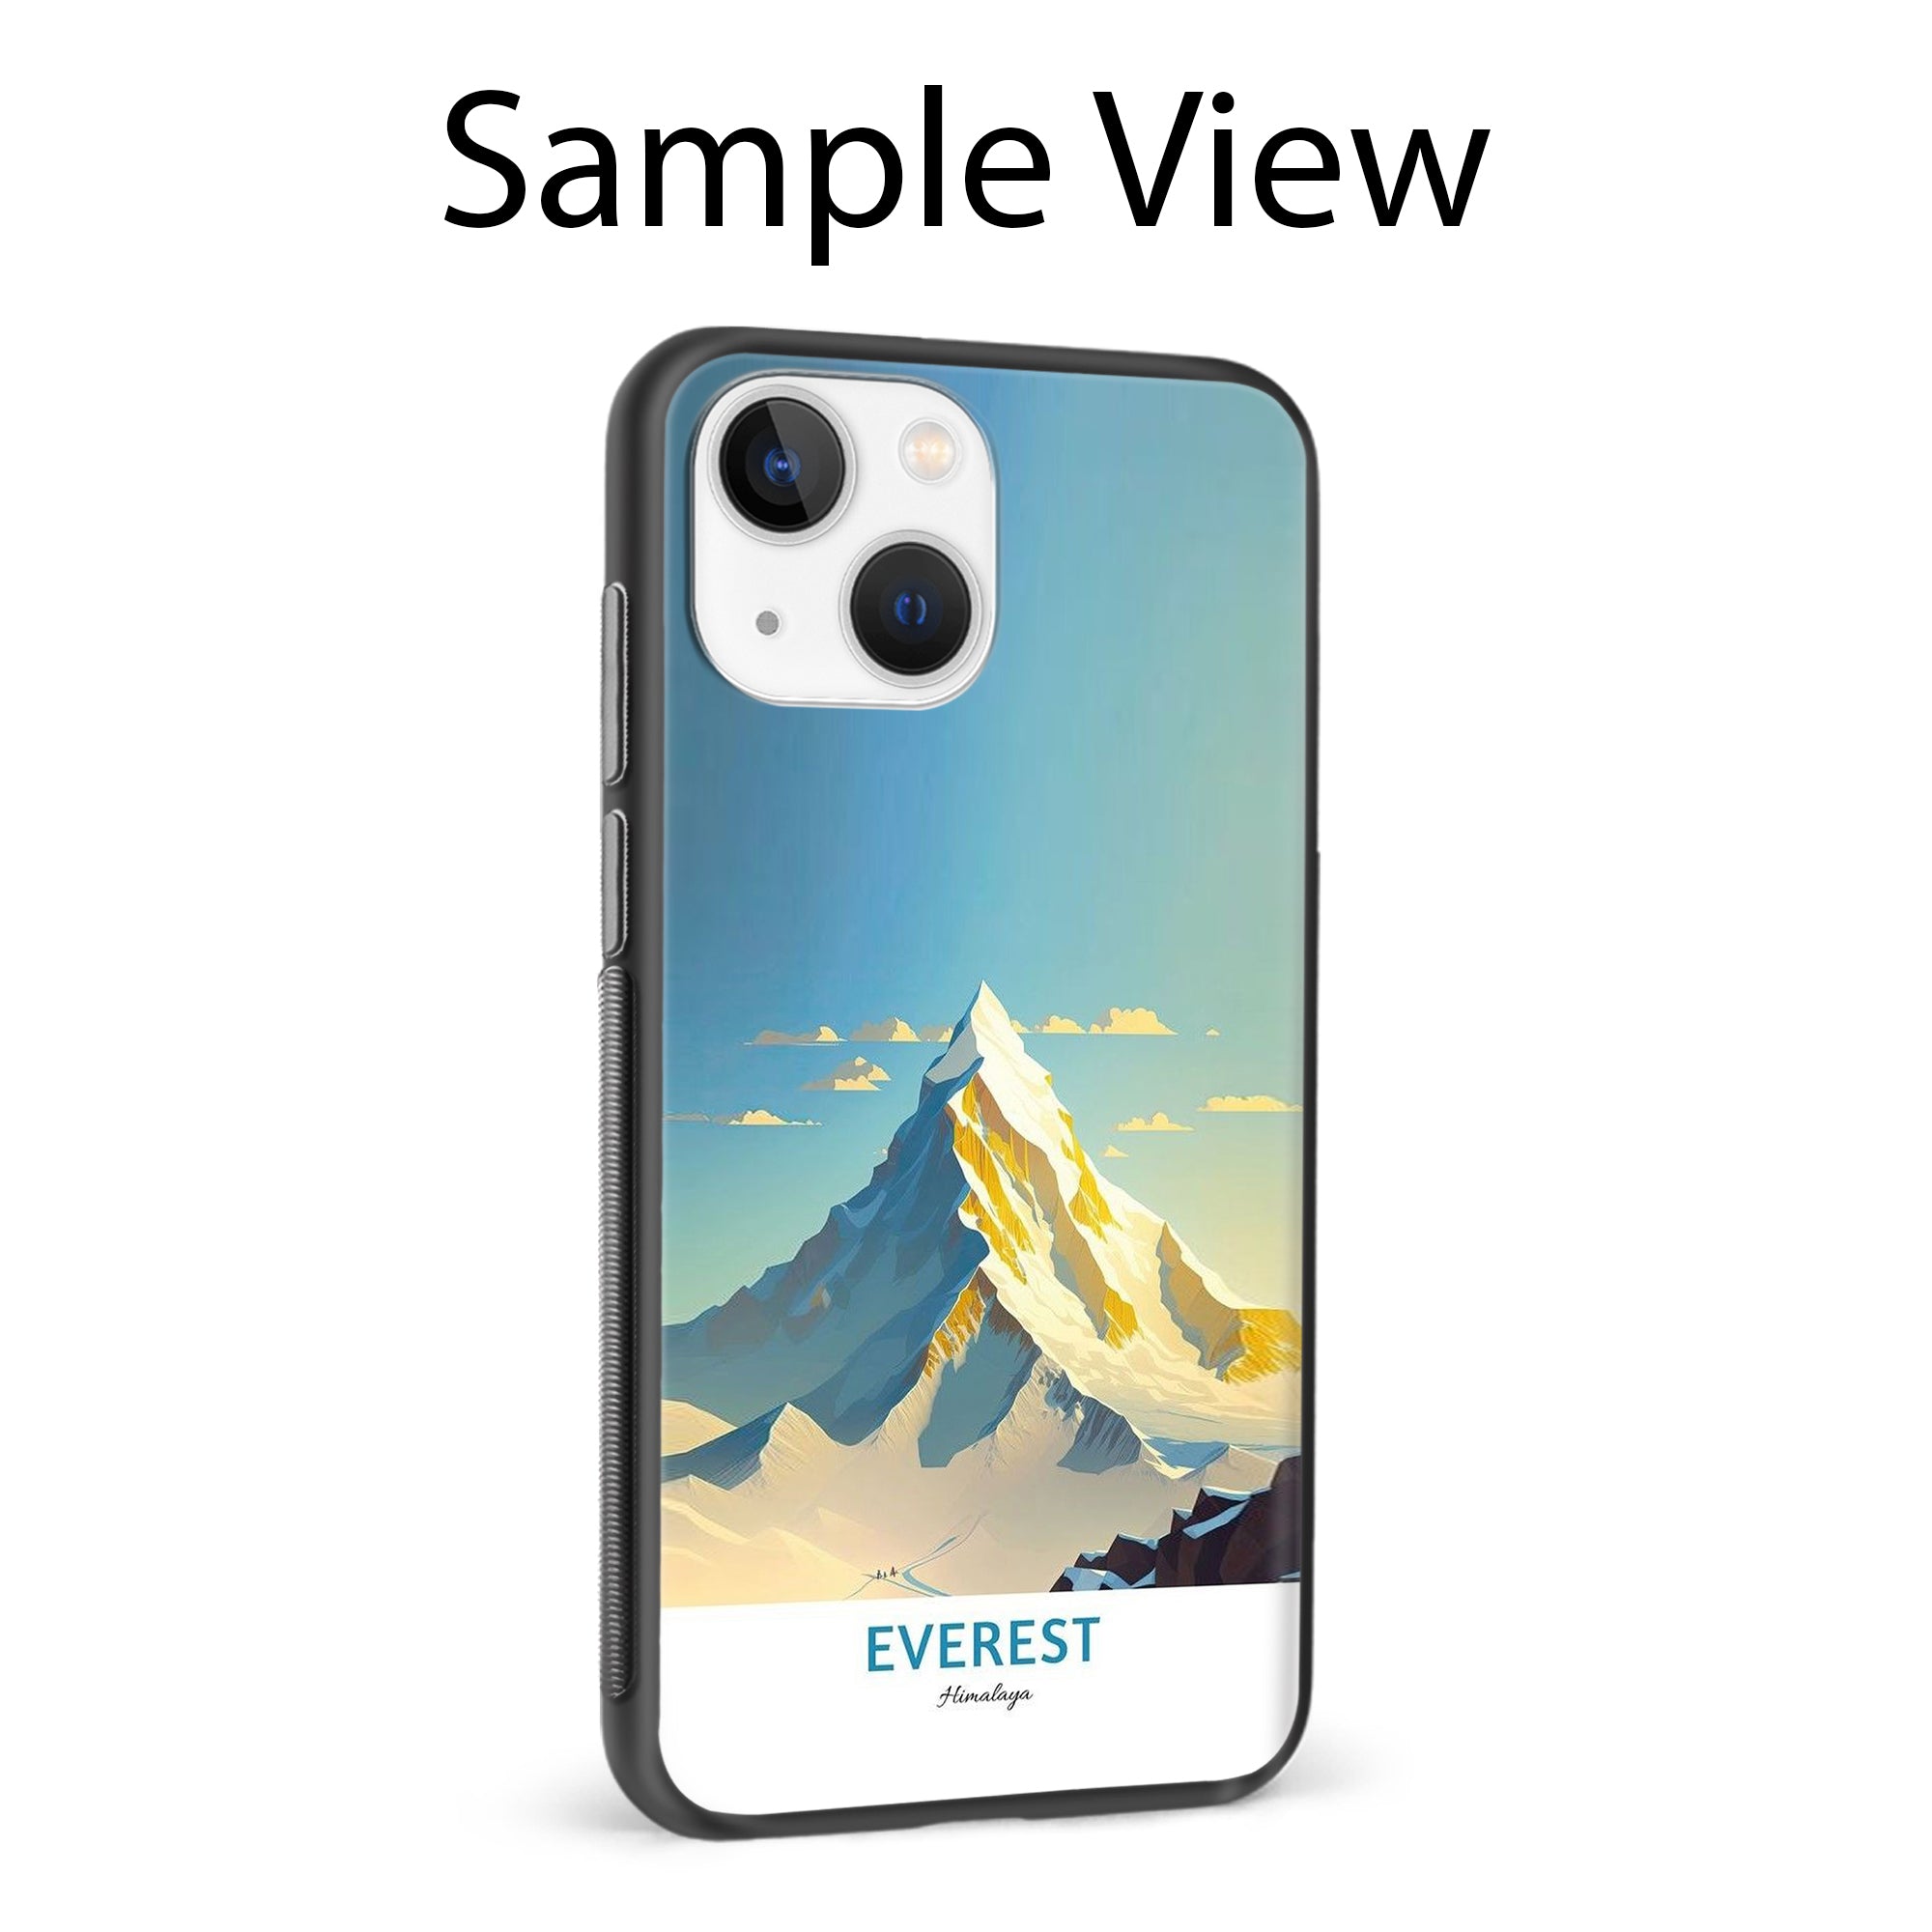 Buy Everest Metal-Silicon Back Mobile Phone Case/Cover For Samsung Galaxy M31 Online